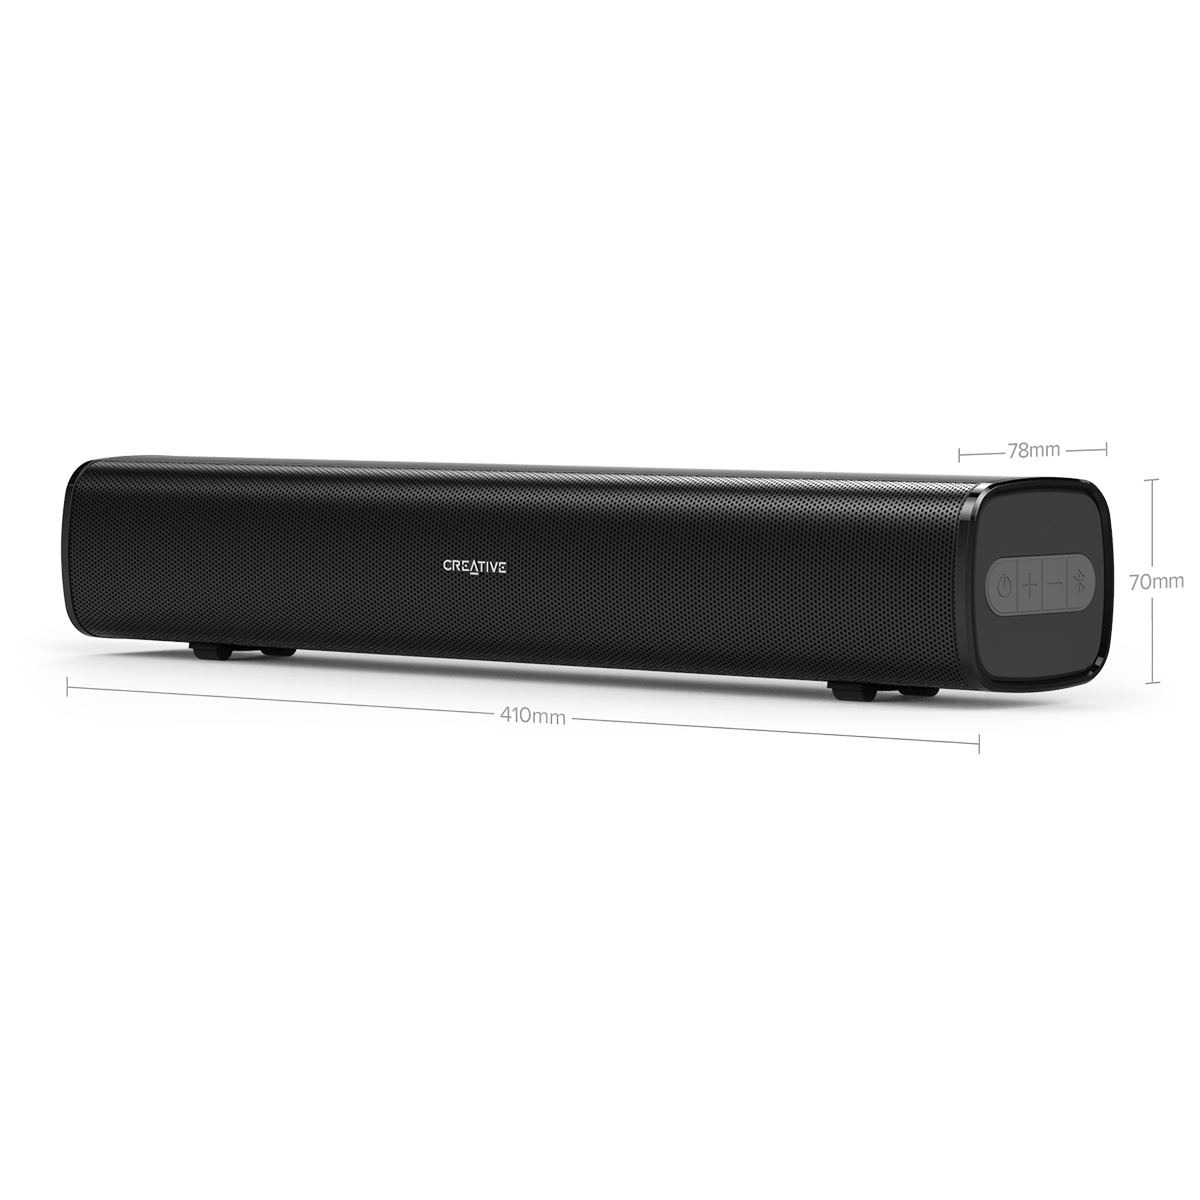 Creative Soundbar Stage Air with Bluetooth Connection, Compact Size, Aux-In Support, USB Slot, Up To 6 Hours Play Time